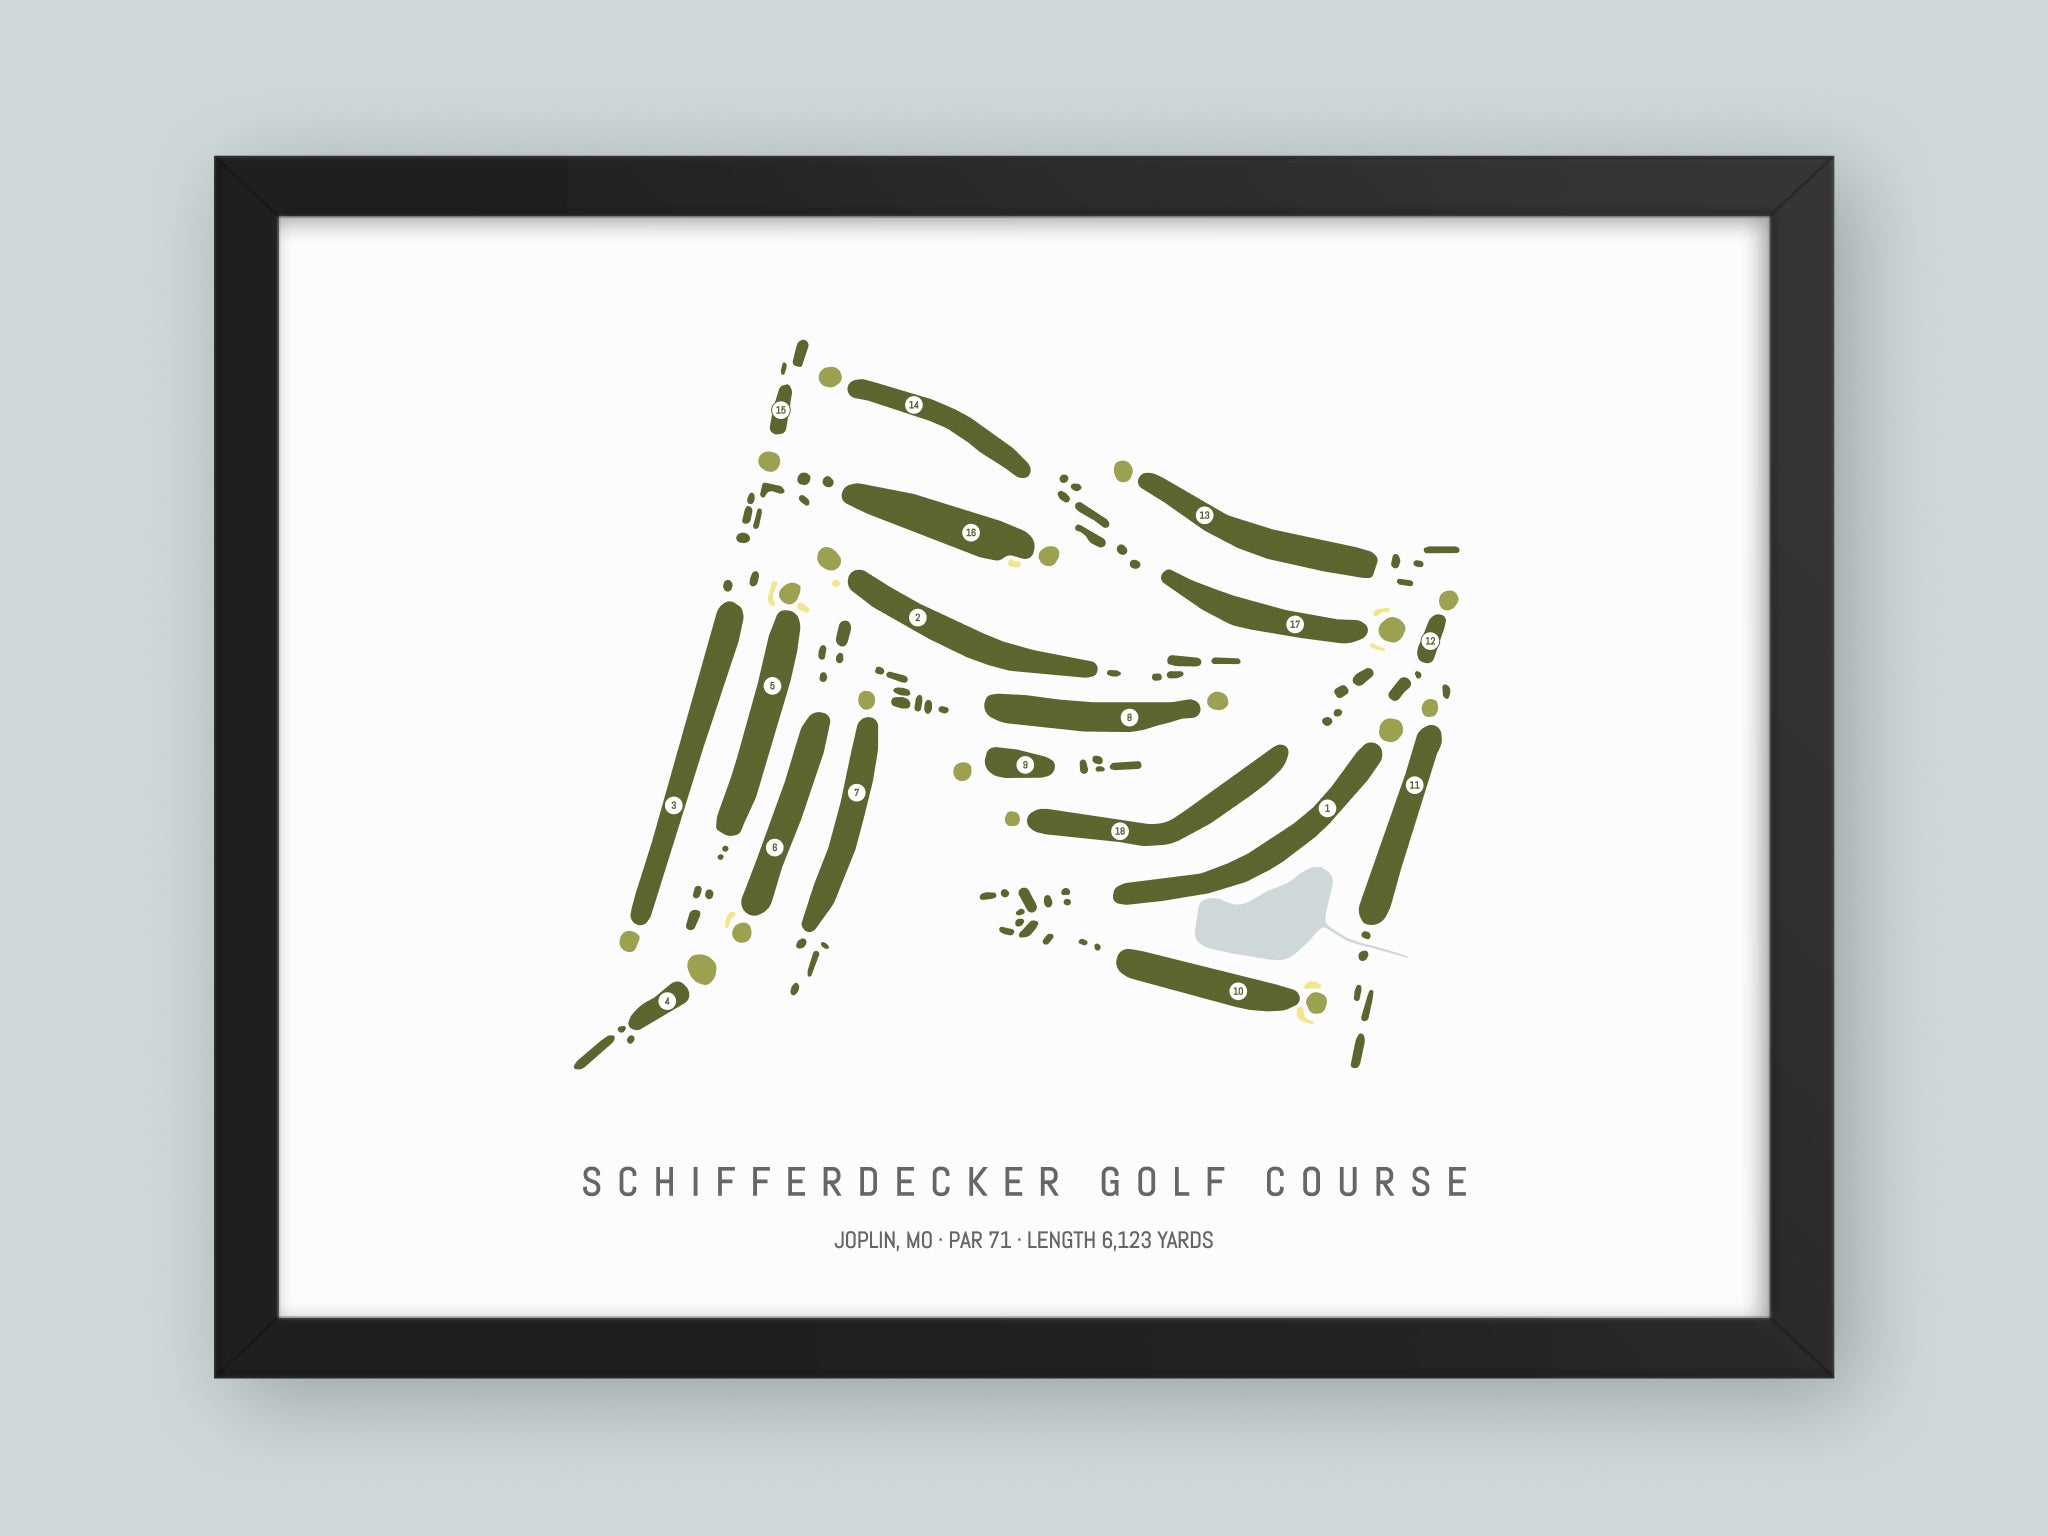 Schifferdecker-Golf-Course-MO--Black-Frame-24x18-With-Hole-Numbers